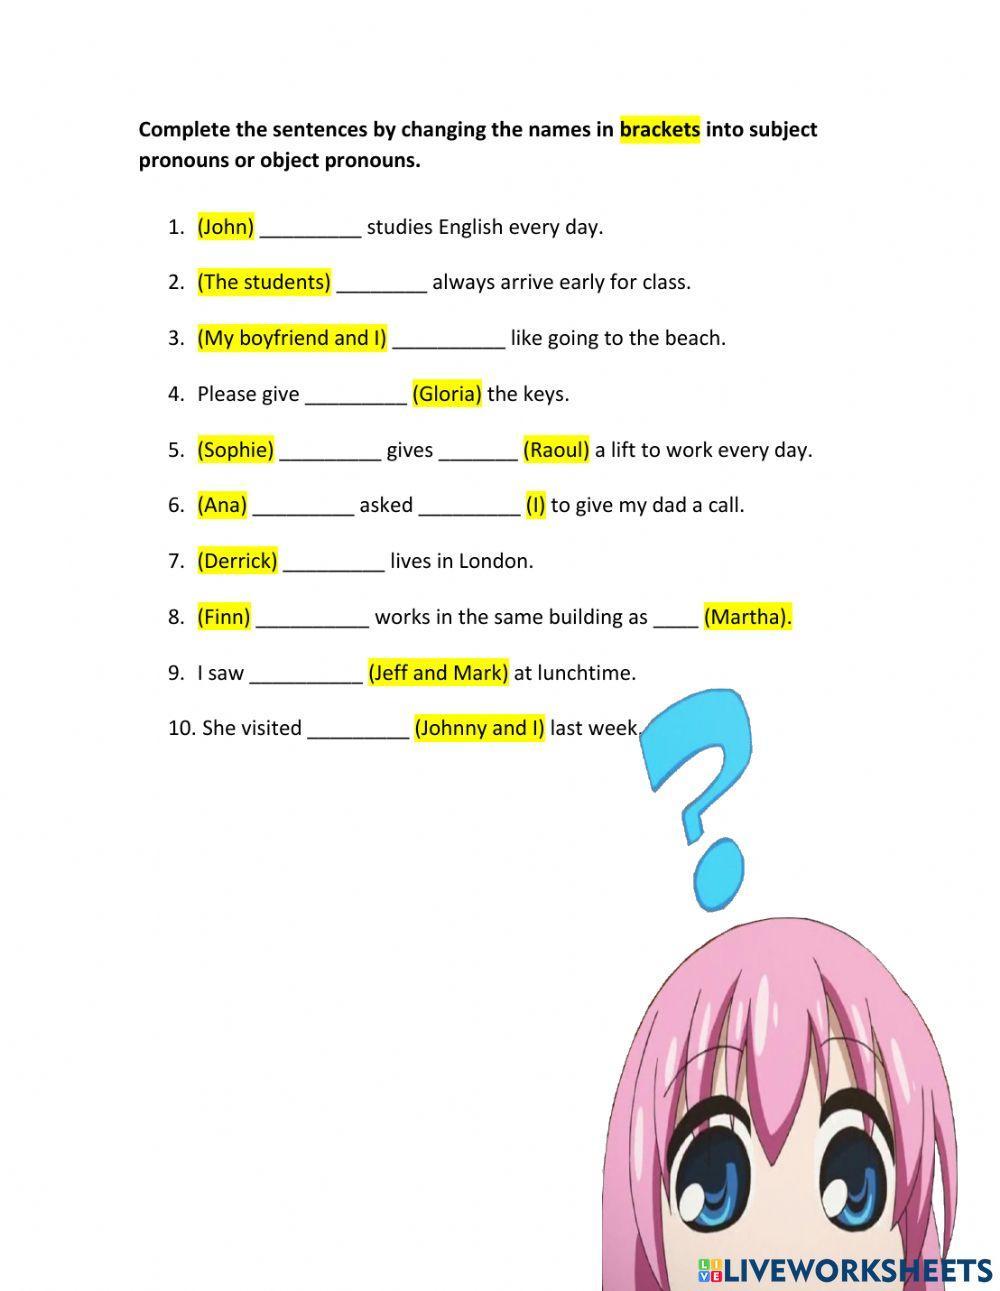 Object and Subject pronouns